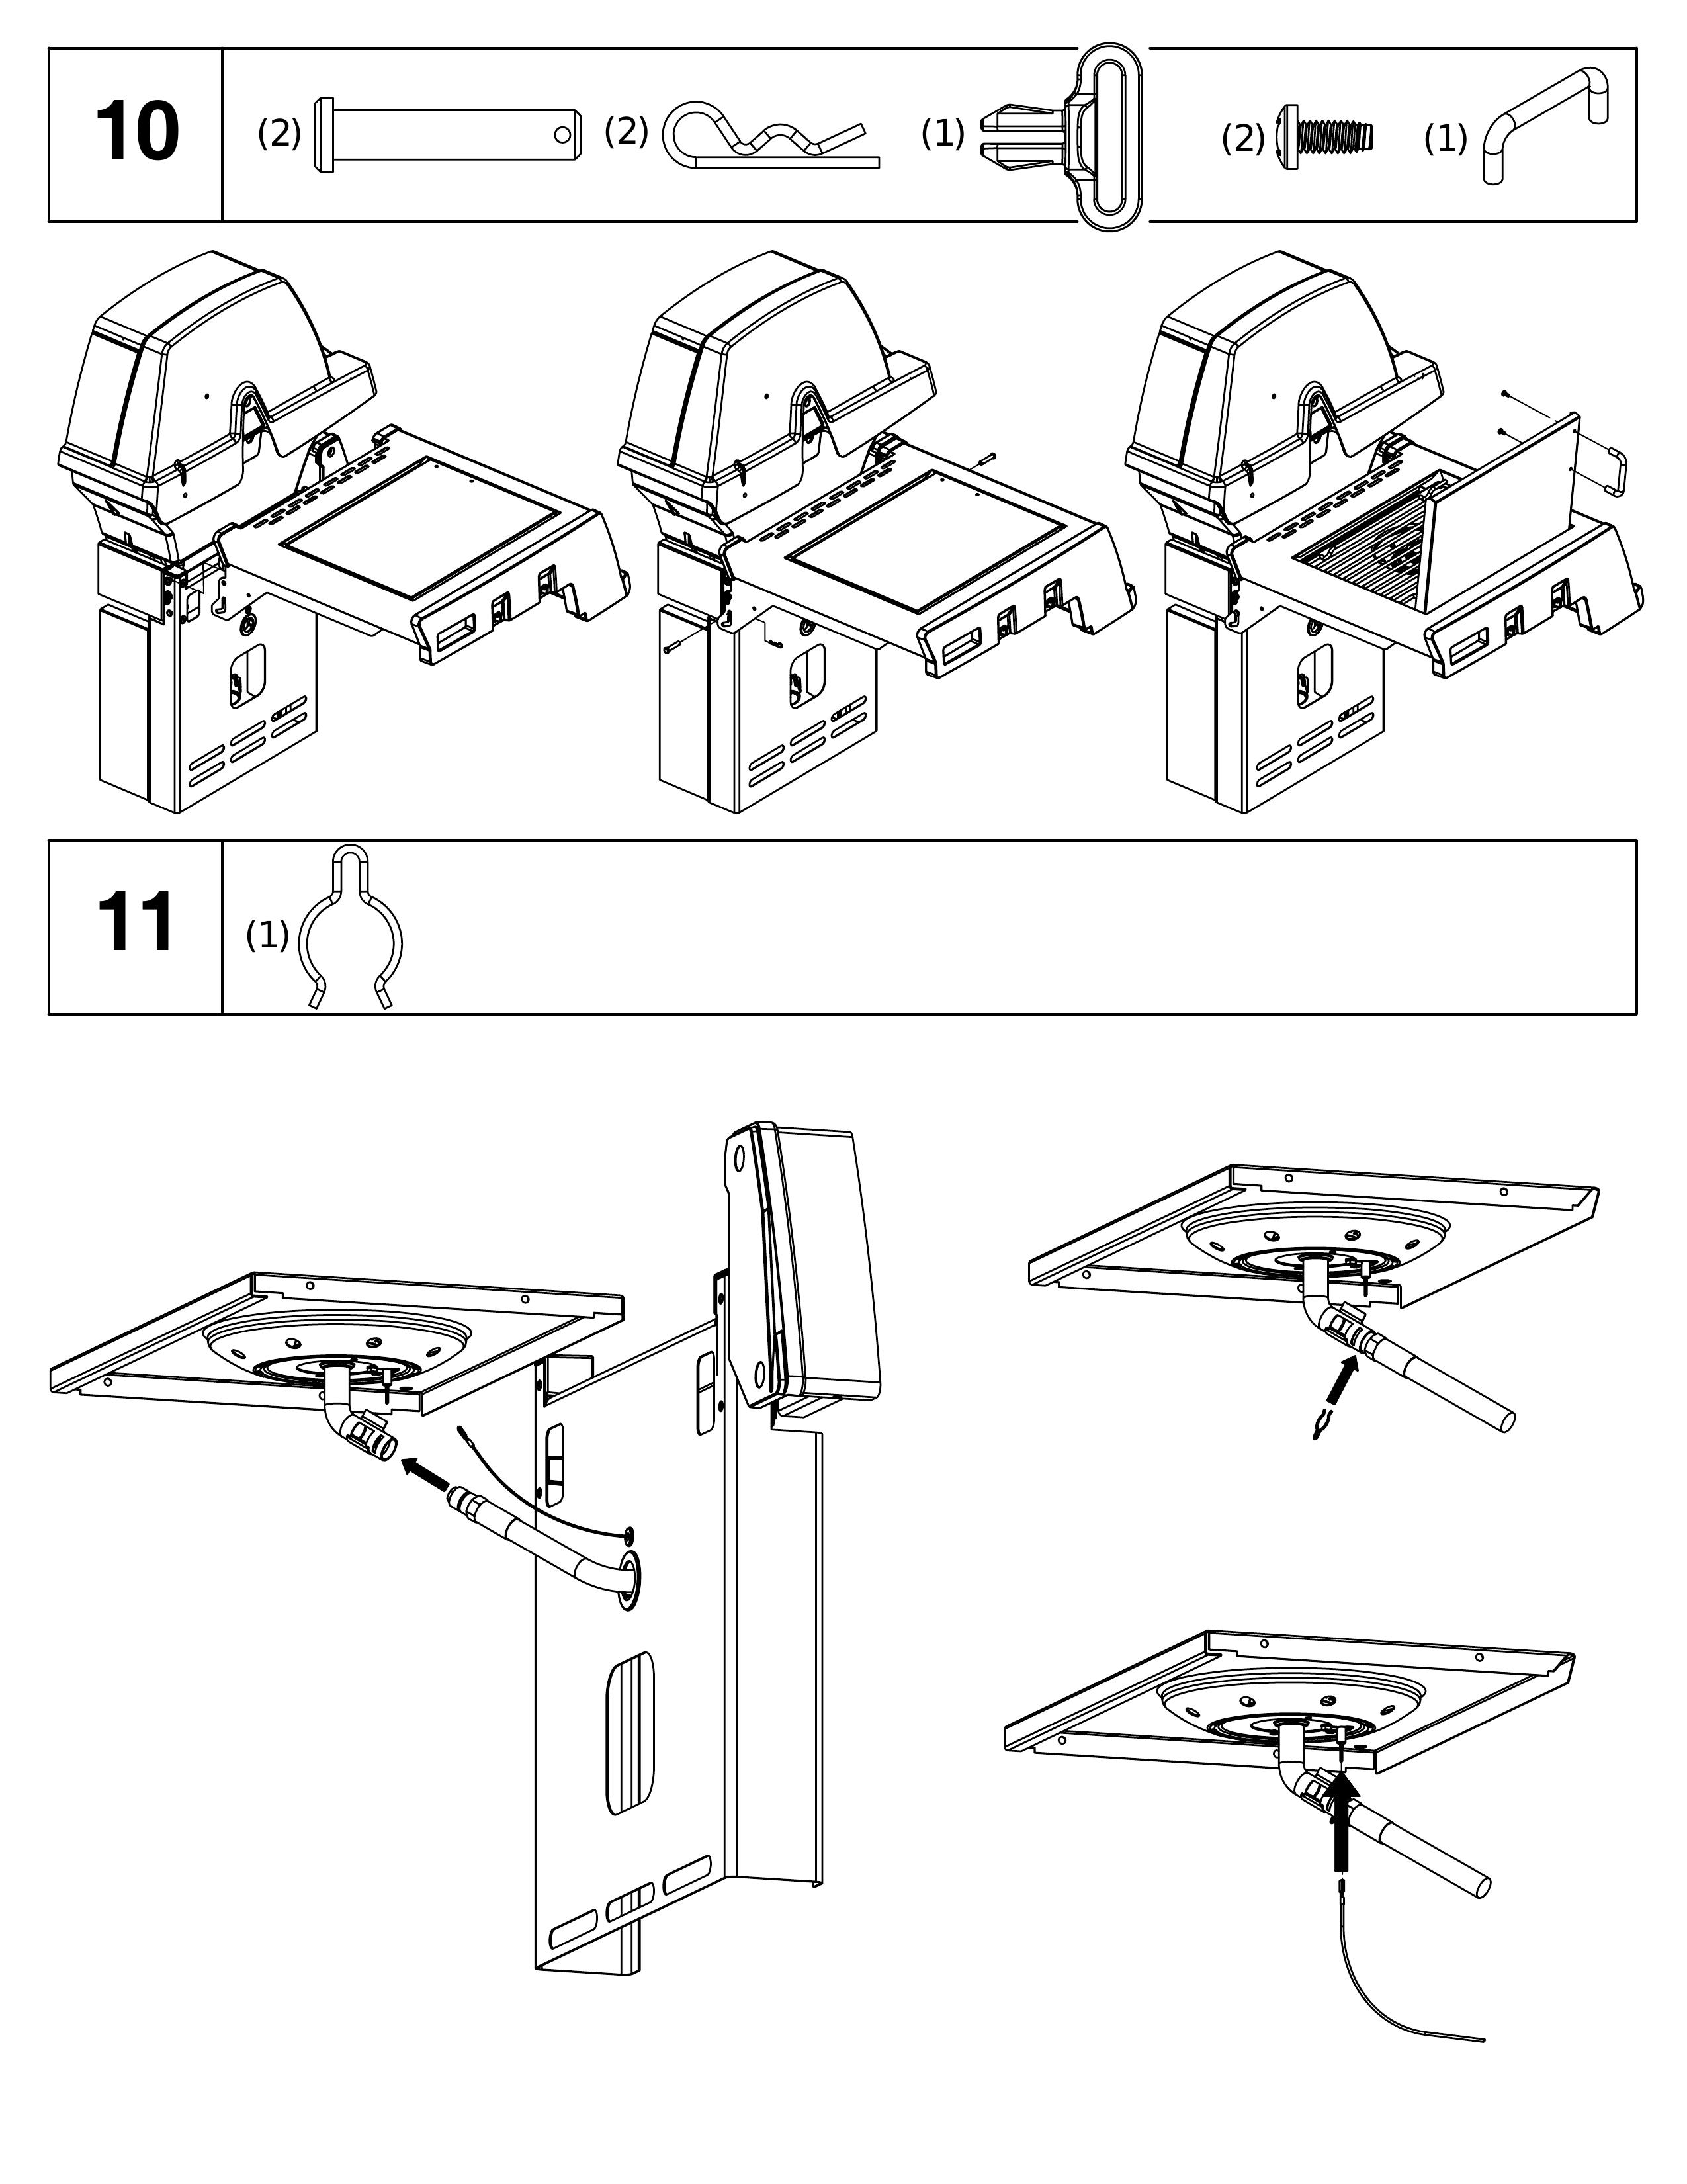 Broil King 9887-87 Electric Grill User Manual (Page 8)